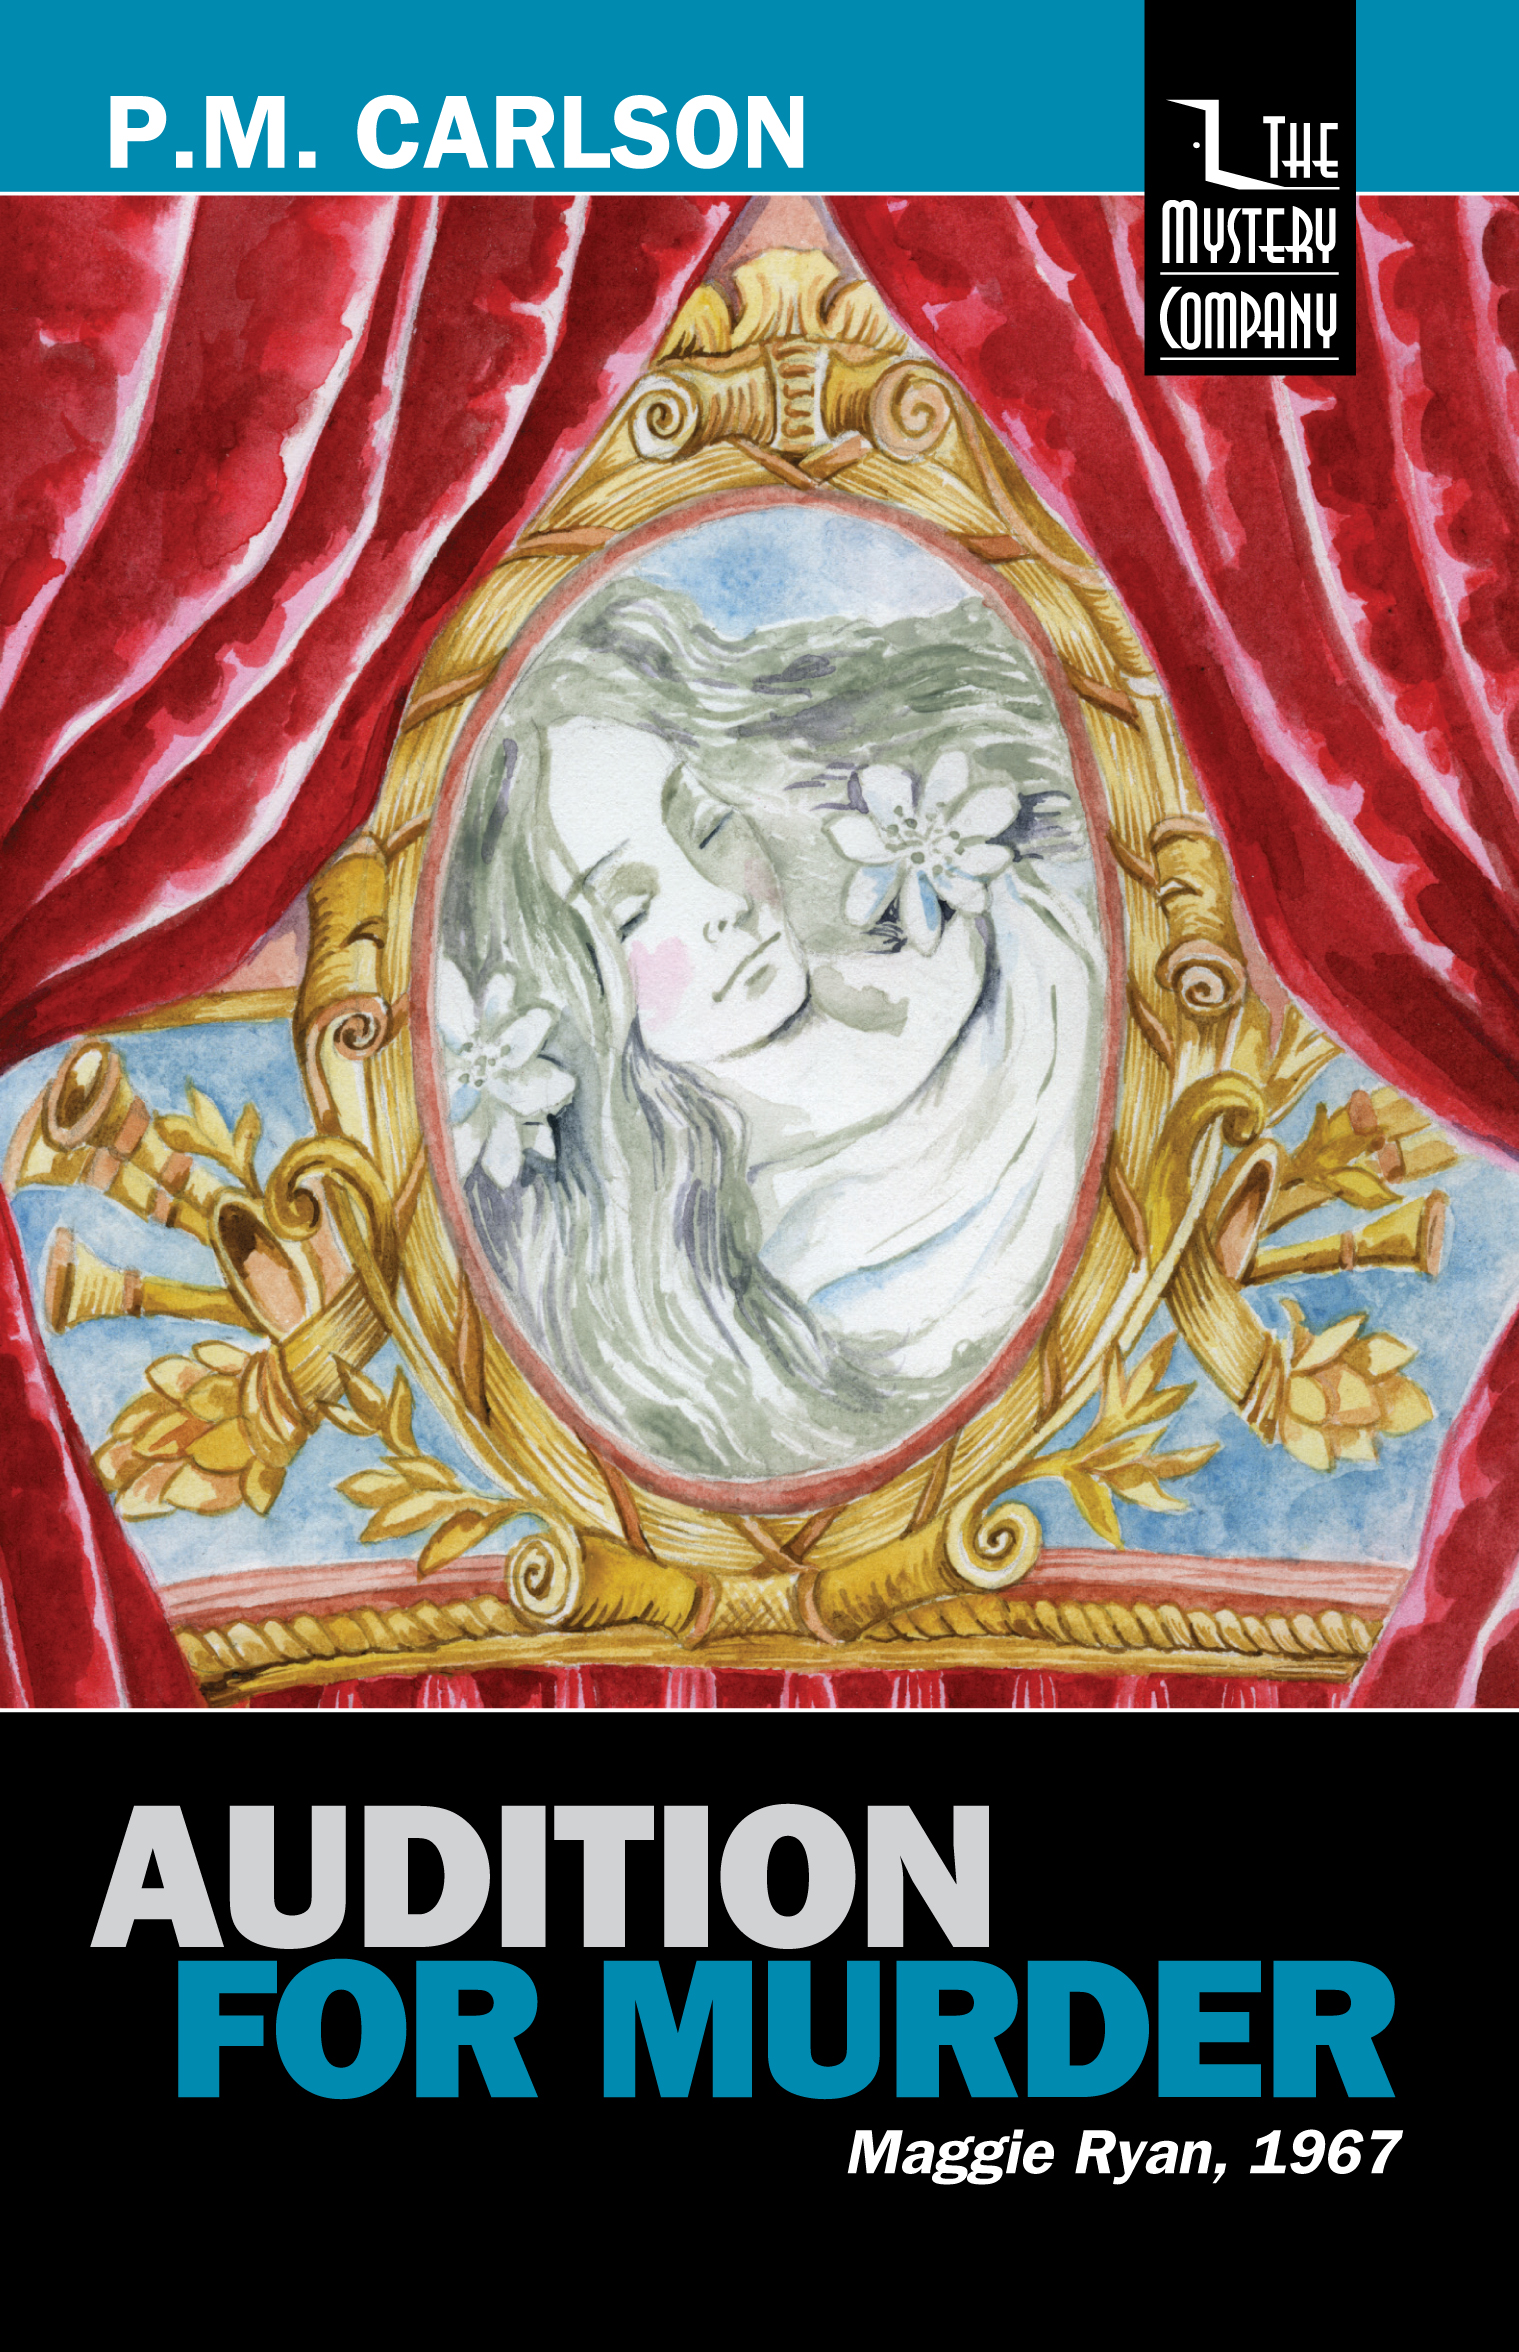 Audition for Murder by P.M. Carlson